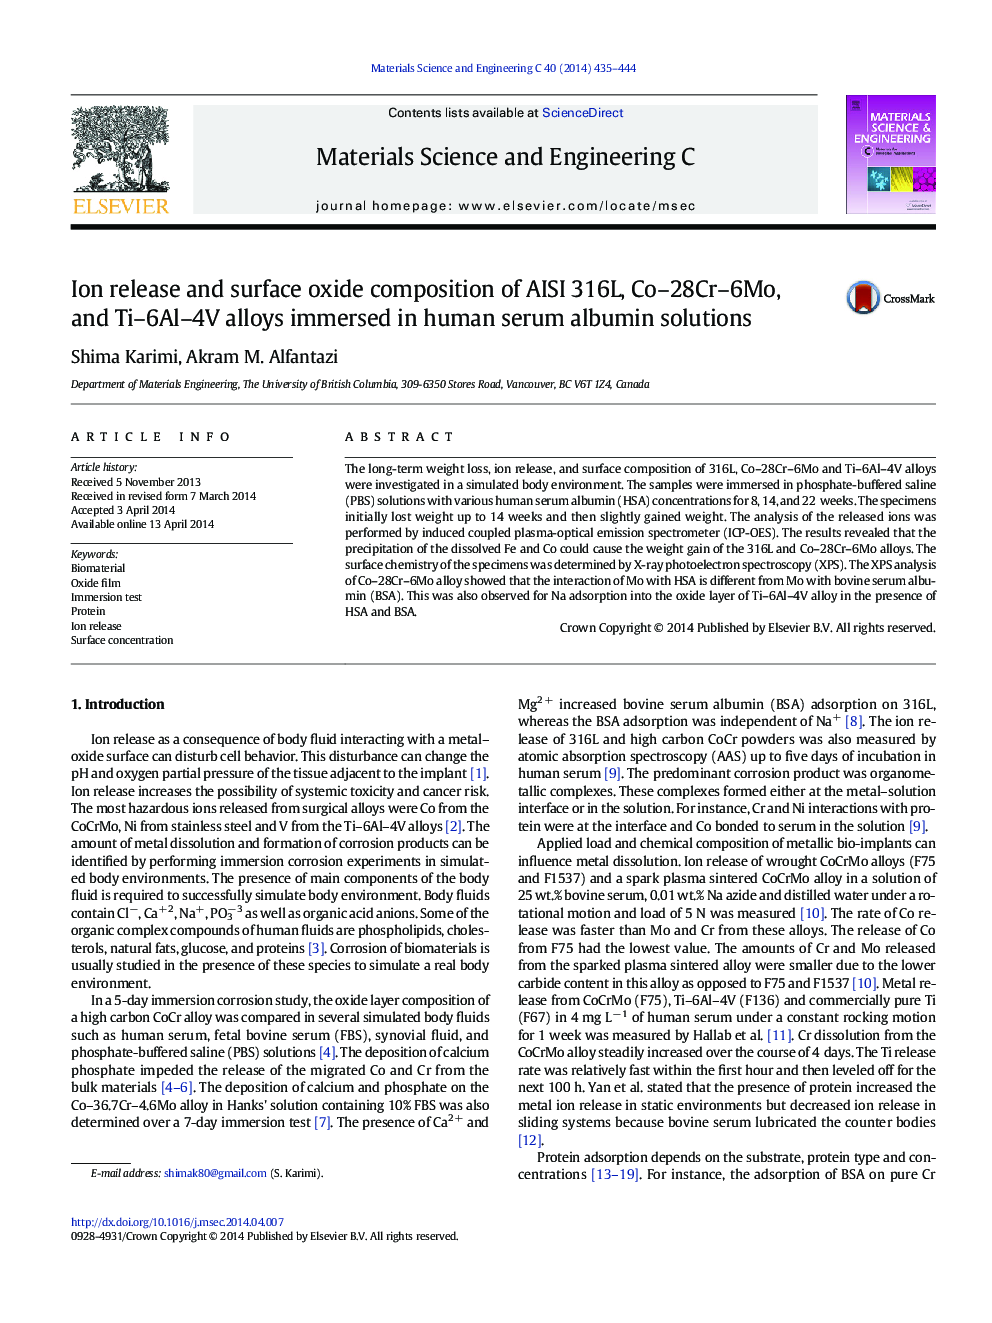 Ion release and surface oxide composition of AISI 316L, Co–28Cr–6Mo, and Ti–6Al–4V alloys immersed in human serum albumin solutions